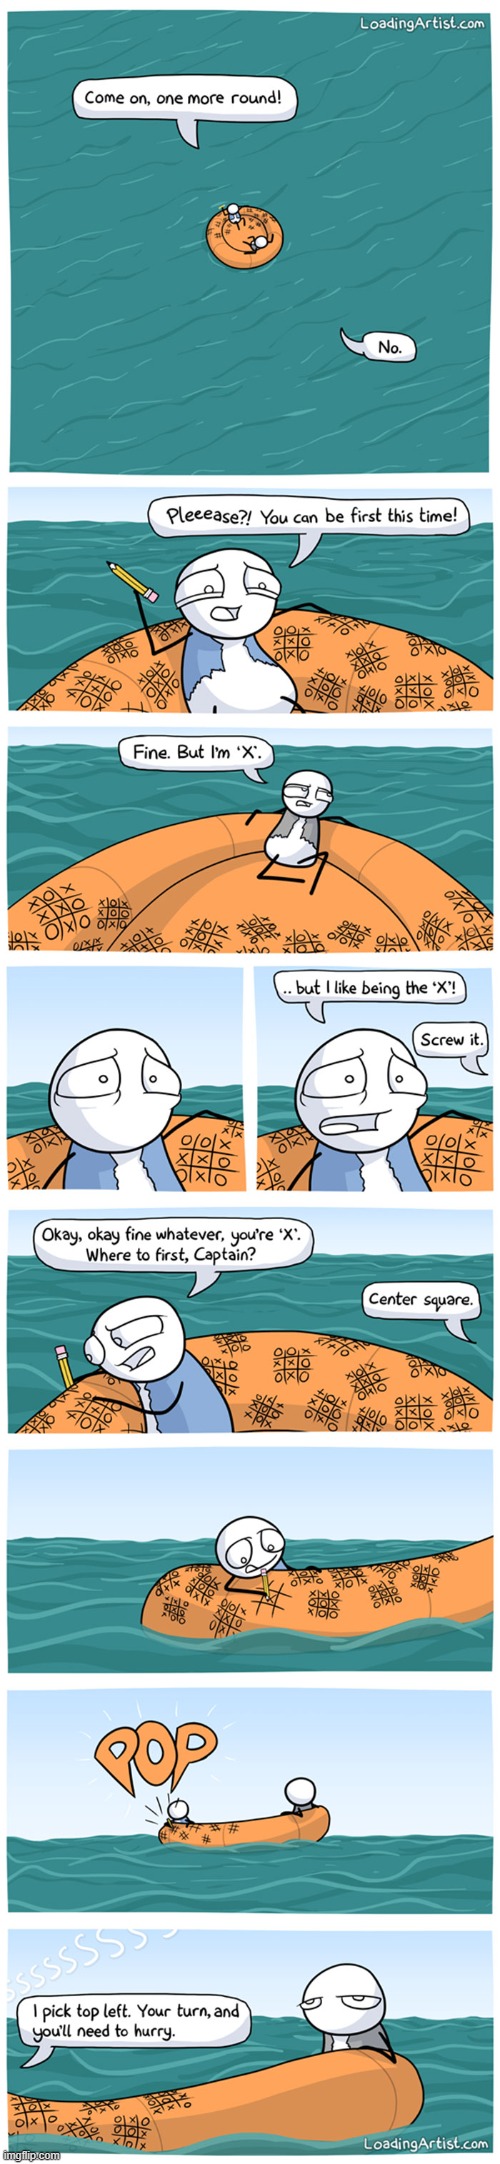 I would've just grabbed the pencil and thrown it into the ocean | image tagged in boat,ocean,stranded,pencil,tic-tac-toe,tic tac toe | made w/ Imgflip meme maker